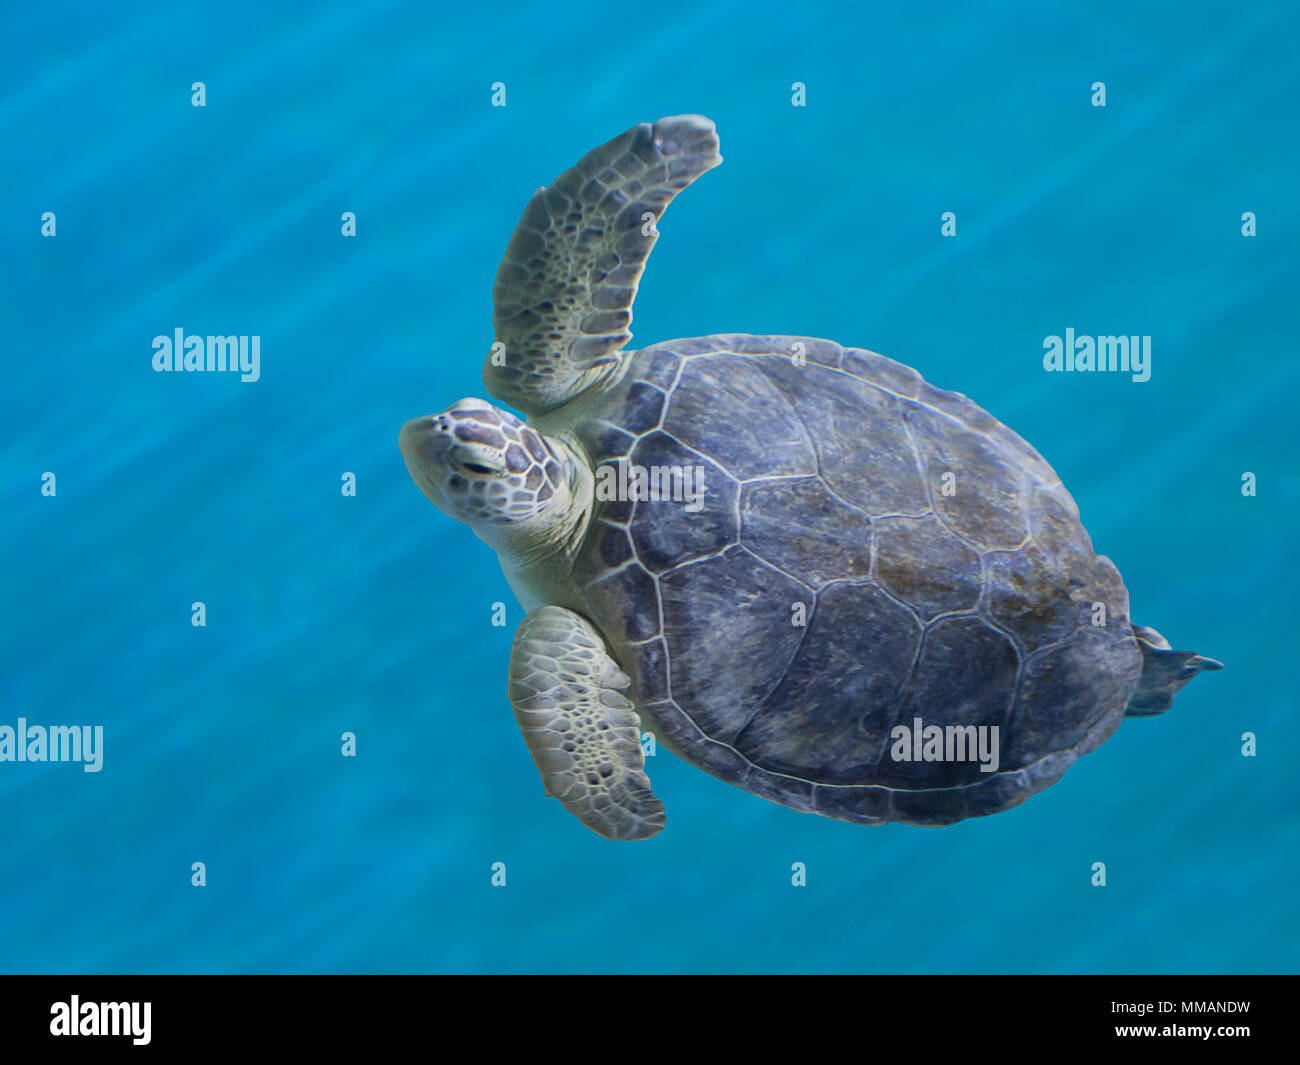 A beautiful and graceful Green Sea Turtle swimming in blue water. Stock Photo